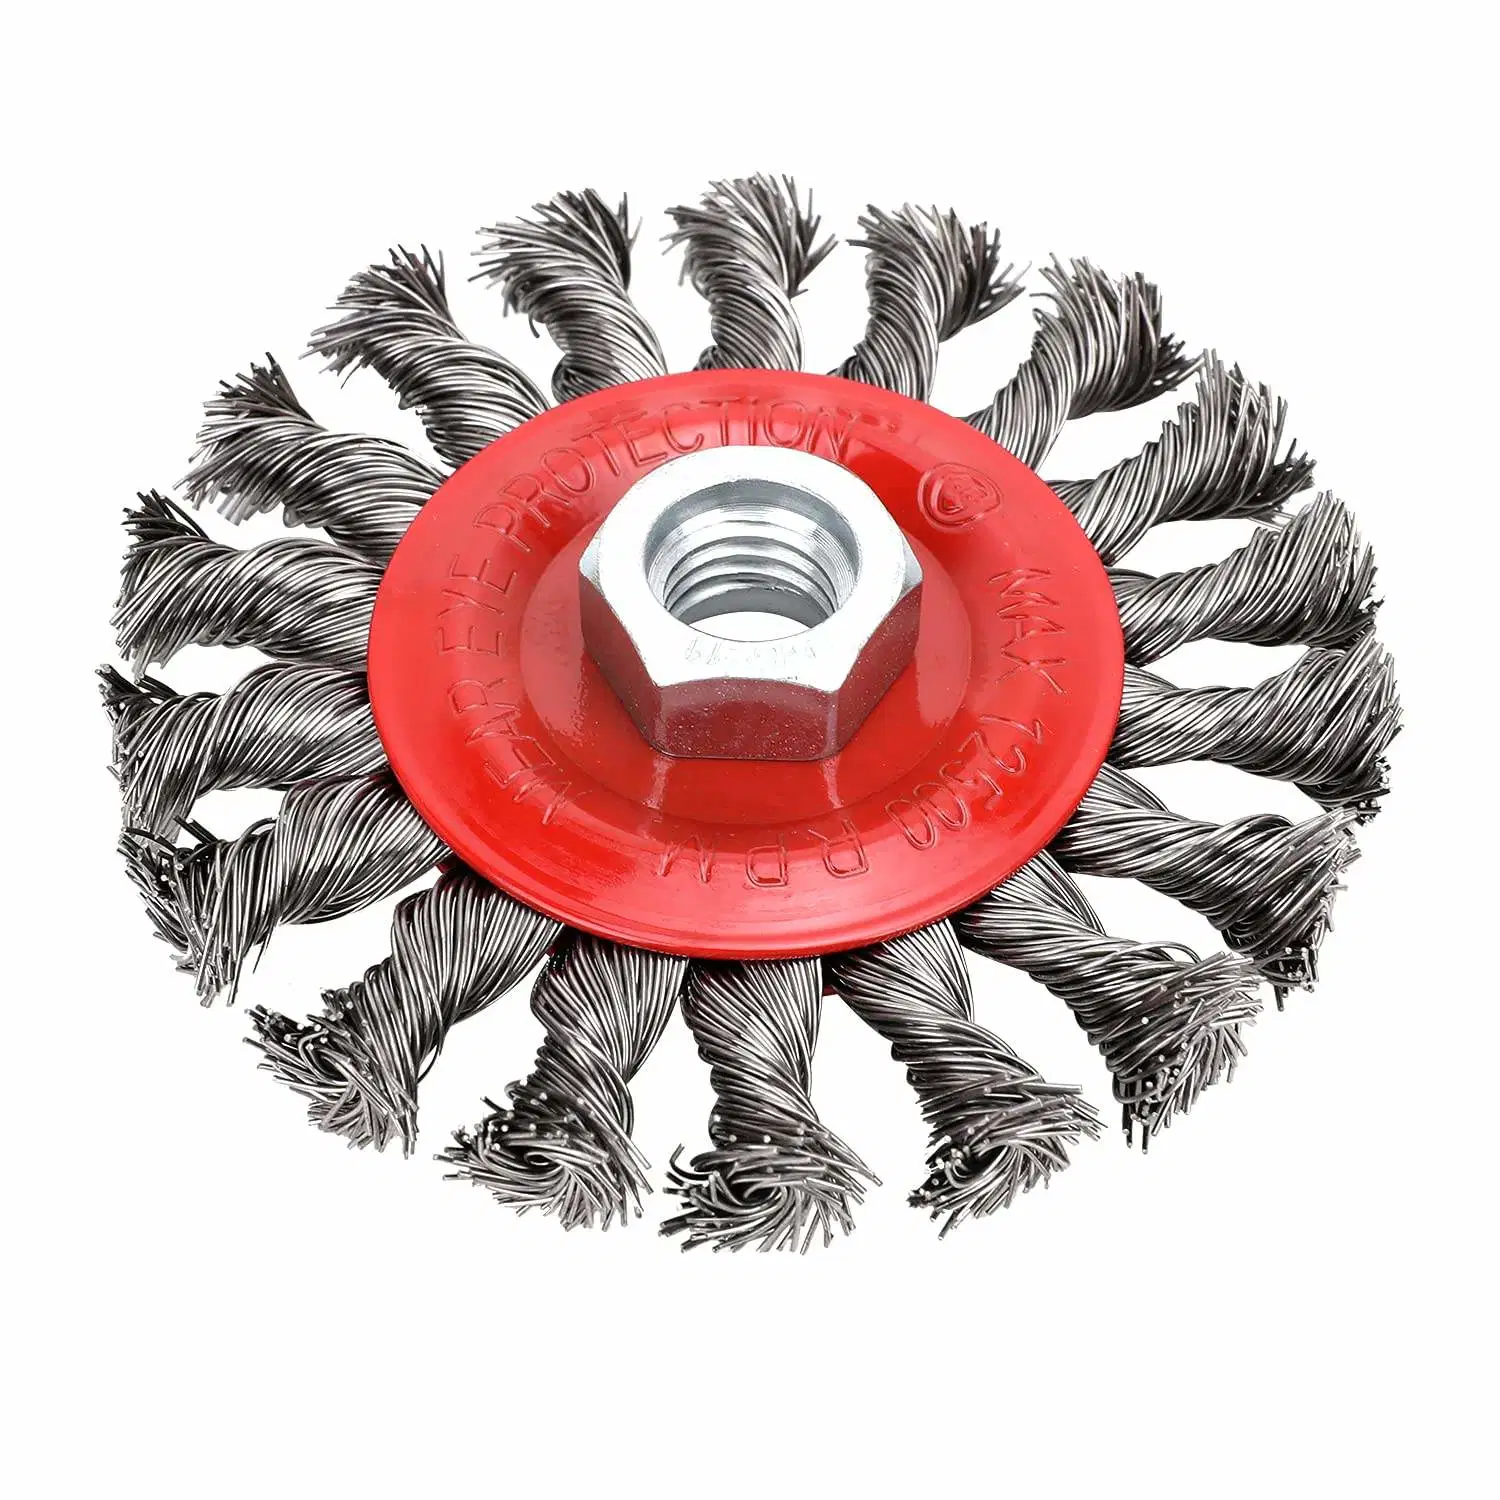 Abrasive Tools Stainless Steel Wire Wheel Brush